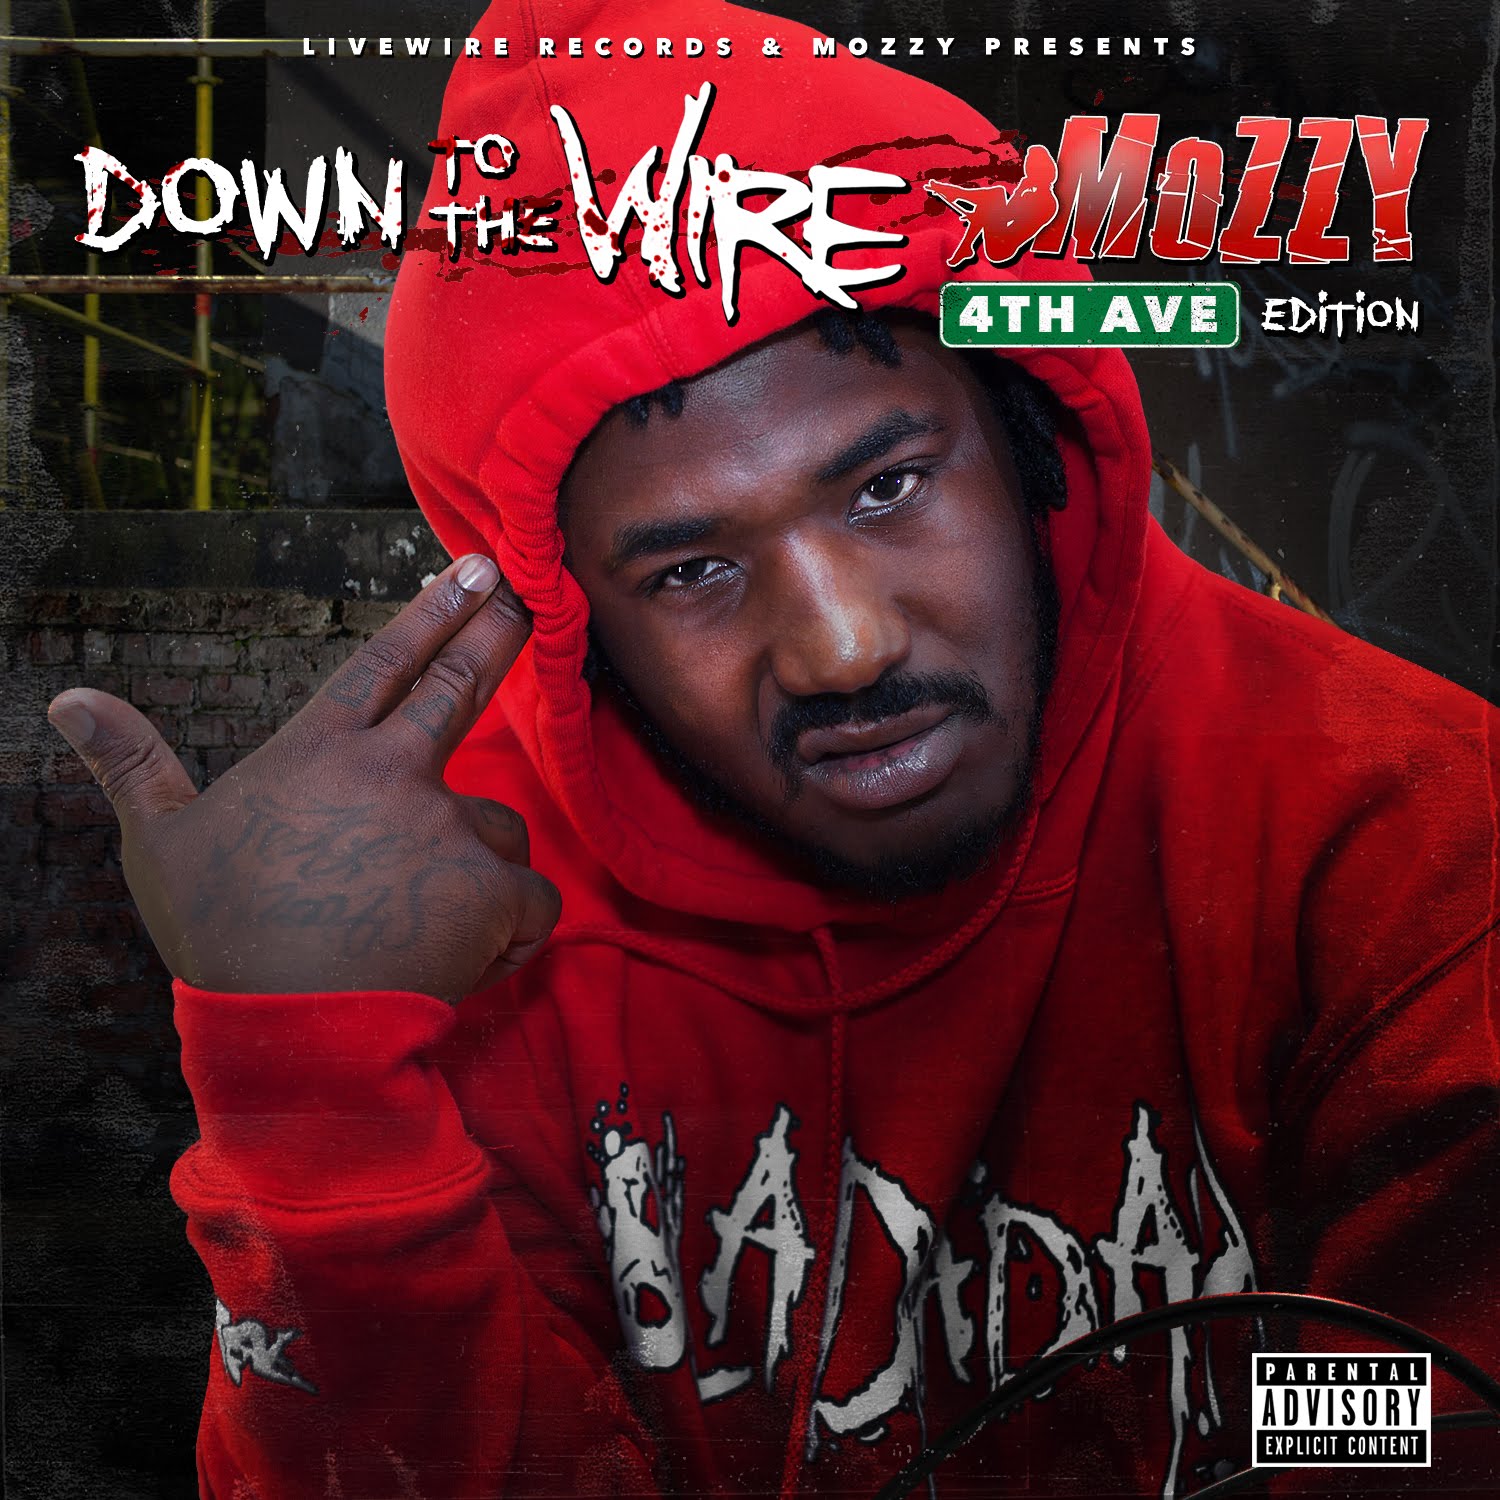 Mozzy - "My Life" (Produced By AK47)